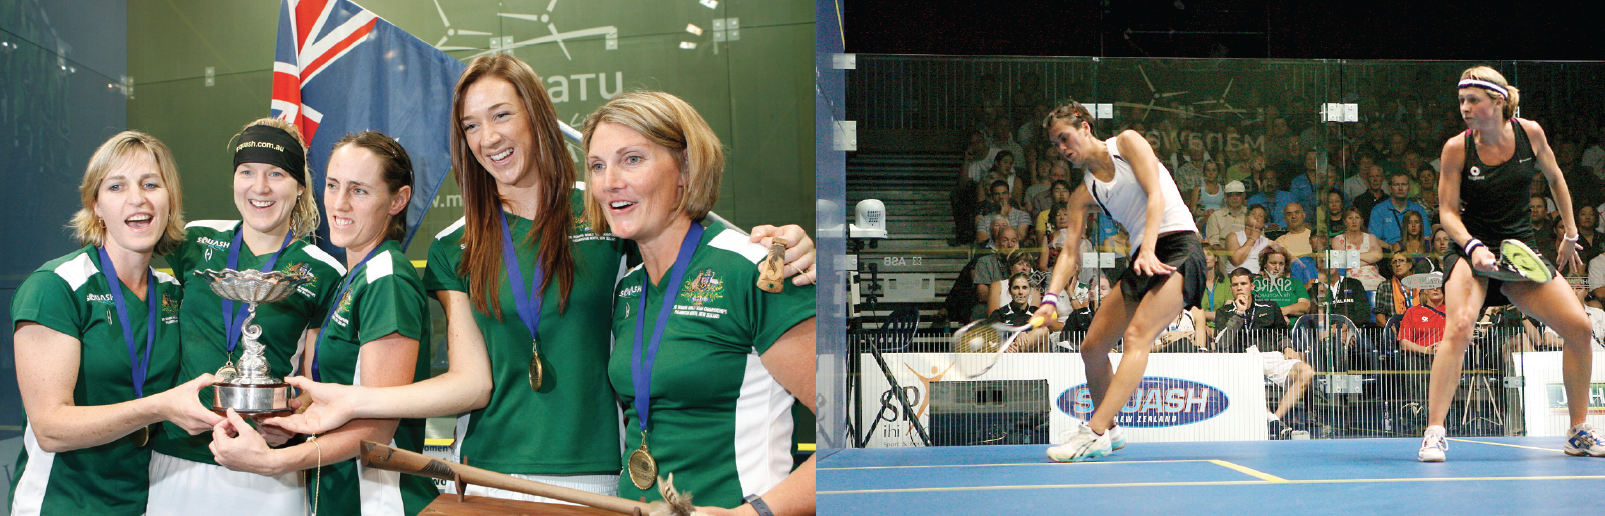 The Aussies dominated the Women's World Team Championships, featuring (above, L-R) former World No. 1, Sarah Fitz-Gerald, Kasey Brown, former World No. 1, Rachel Grinham, and Donna Urquhart, coached by former World No. 1, Michelle Martin. The return of Shelley Kitchen to the Kiwis (above R, in white) pushed the host country to a 4th place finish.